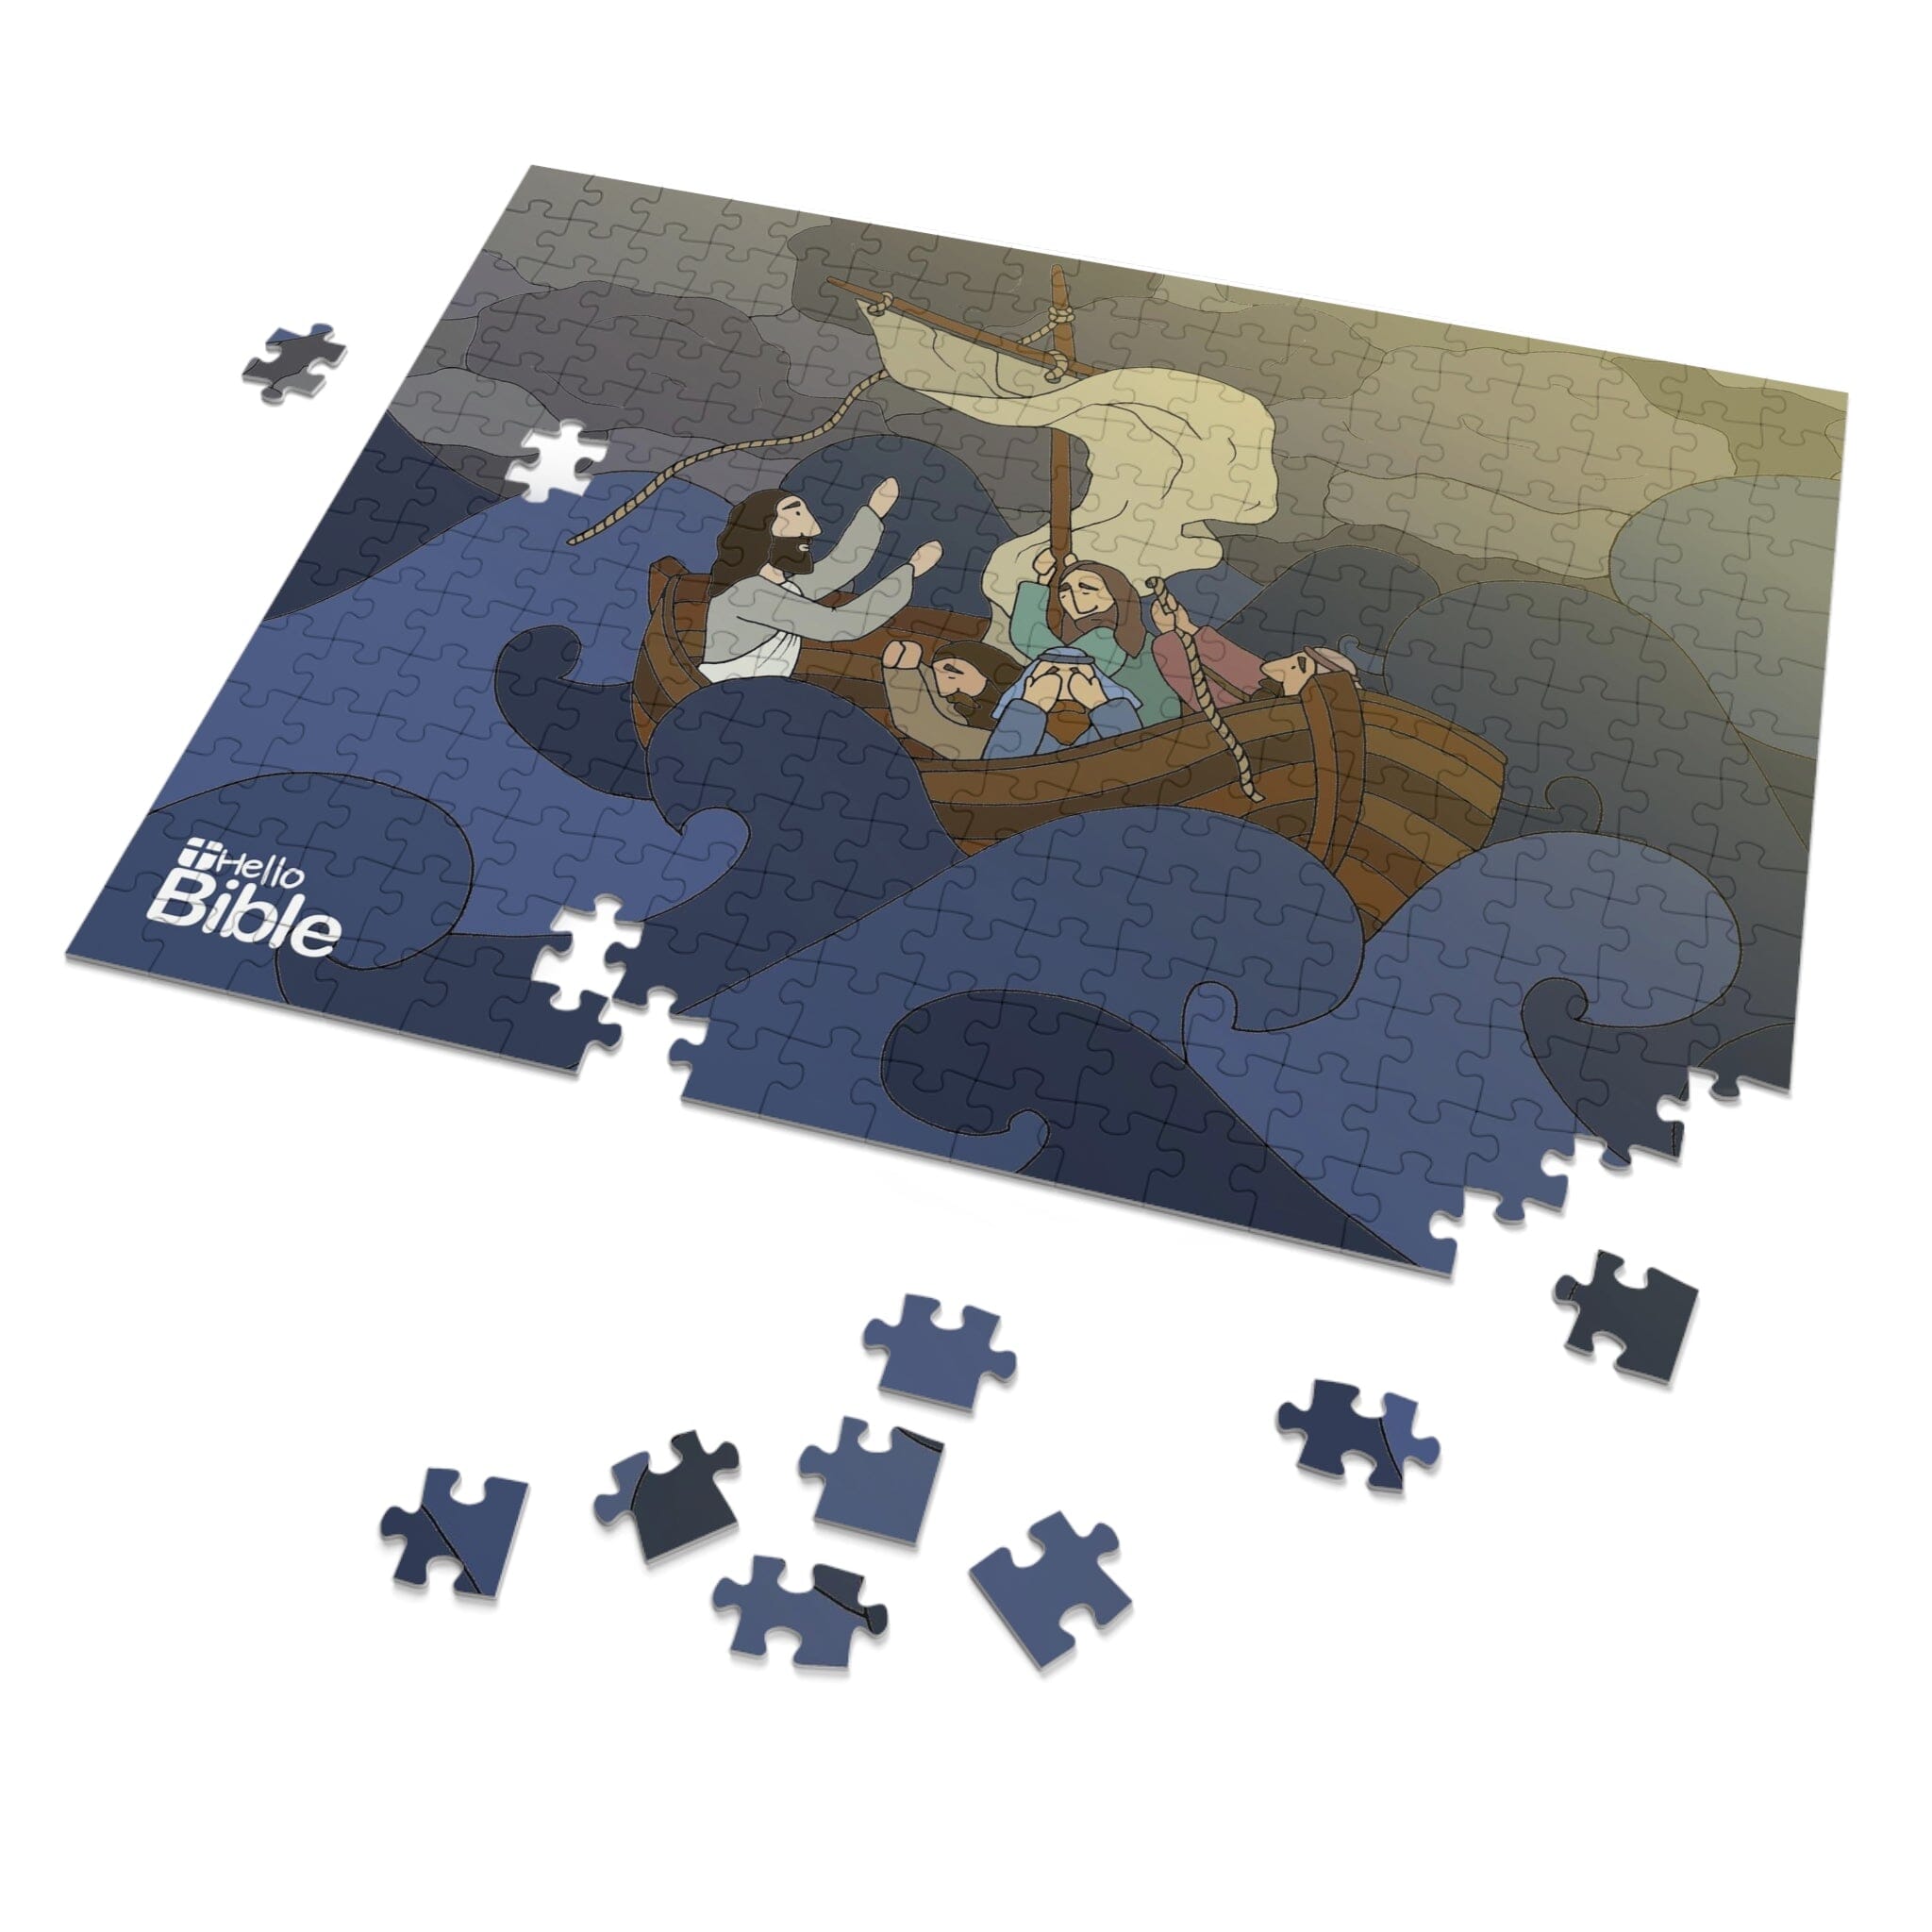 HelloBible Jesus Calms the Storm Jigsaw Puzzle (110, 252, and 500 piece)